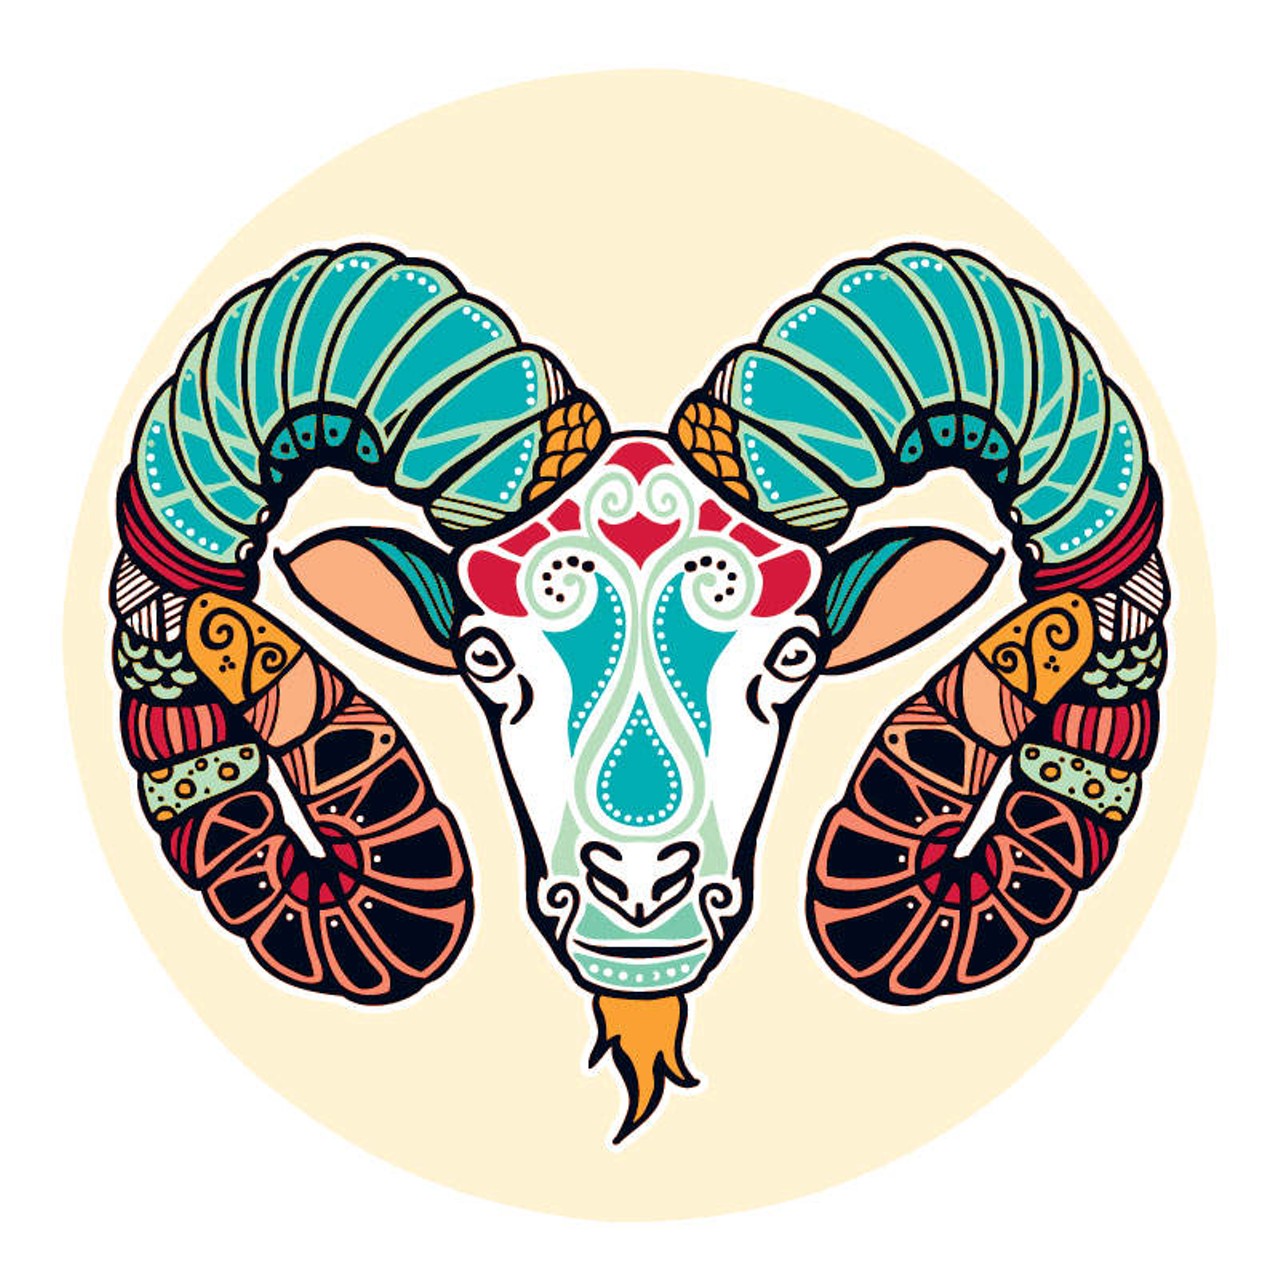 ARIES: March 21 &#150; April 20
You're sitting on the cusp of something big. Waiting for things to unfold is driving you nuts. Your friends keep telling you to calm down. The way the stars are lined up, chilling out would be impossible for you right now. The ones who support your cause wish they could do more to help you through this. The tendency to be right about everything makes it hard for anyone to give you their all. If you can drum up an ounce of receptivity, you could do yourself a huge favor by allowing those who care to offer their input and tell you all about what your blind spots can't see.